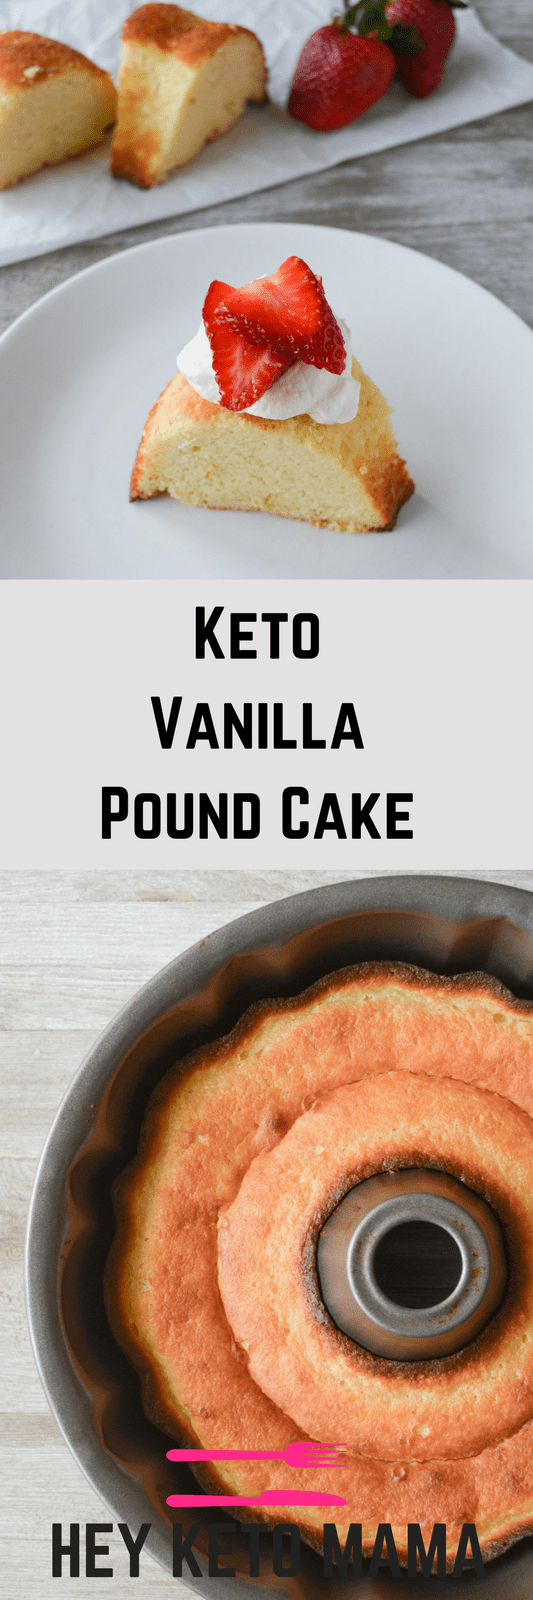 This Keto Vanilla Pound Cake is an incredibly simple dessert with excellent macros and just the right amount of sweetness. It also stores very well, that is...if there are  any leftovers! | heyketomama.com